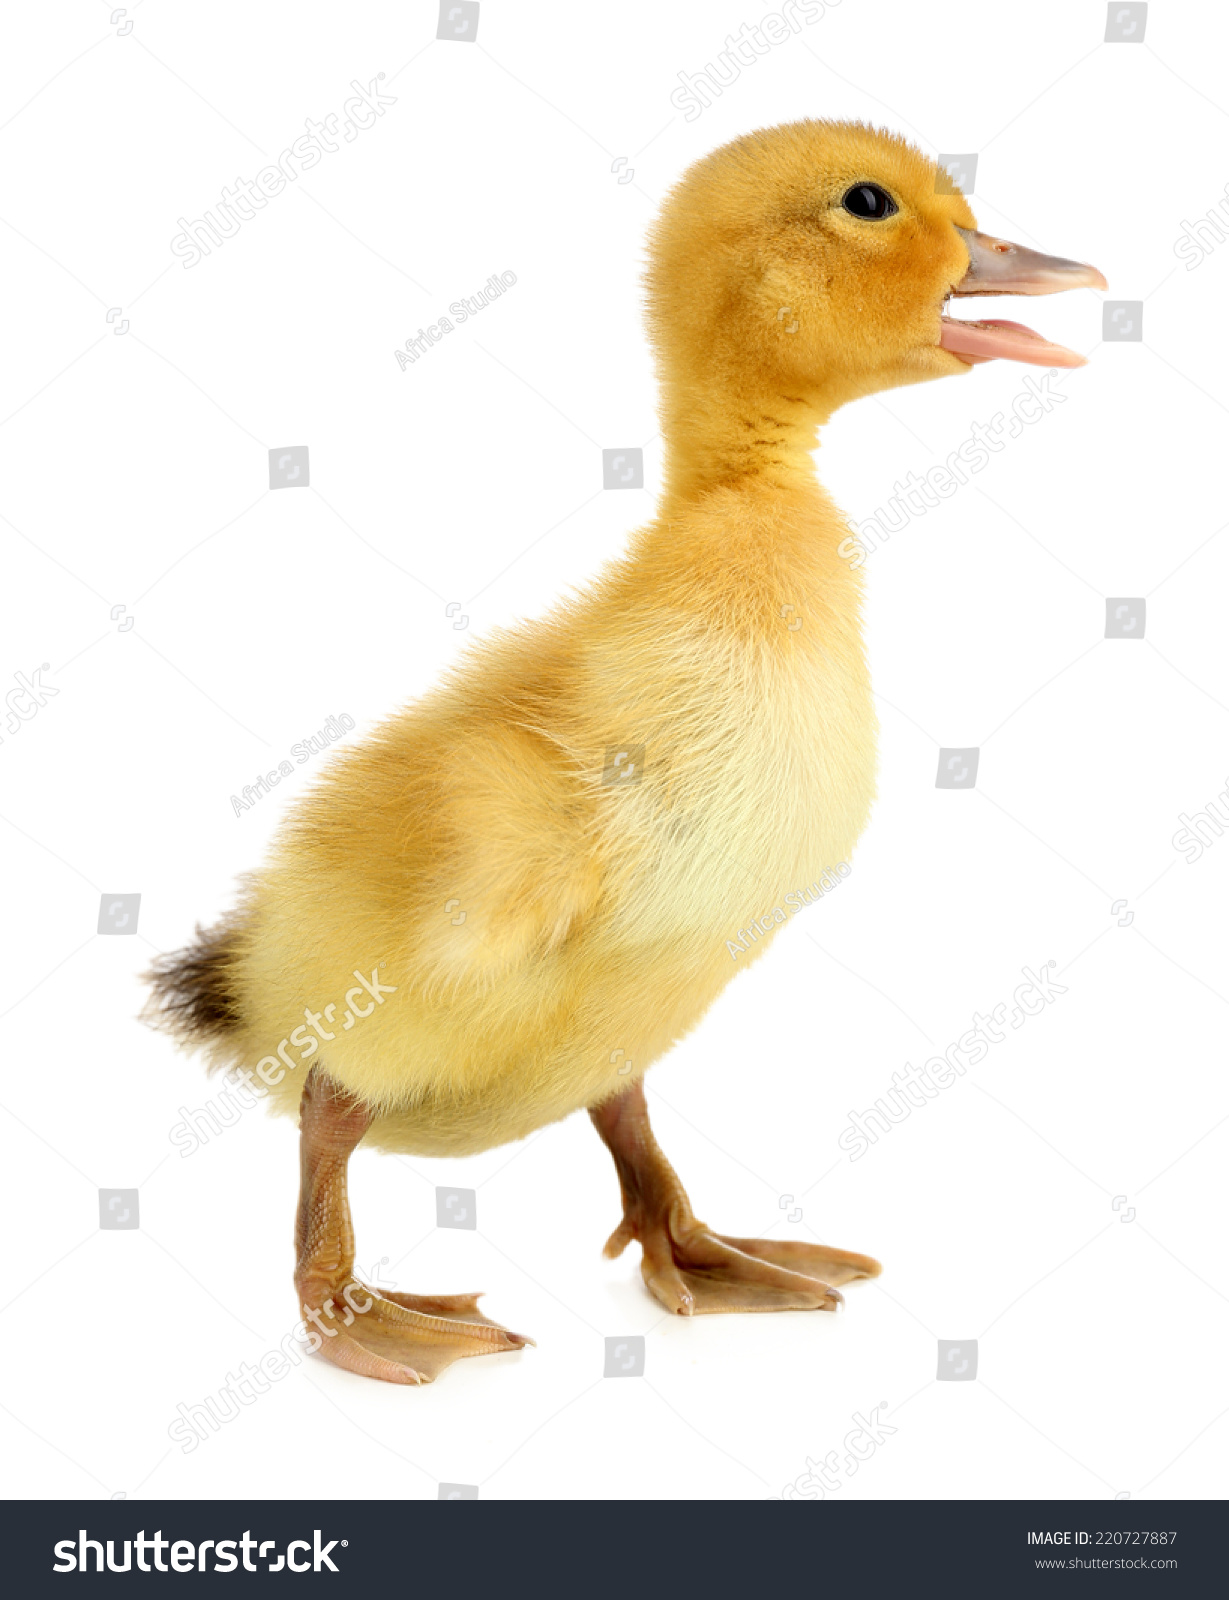 Little Cute Duckling Isolated On White Stock Photo 220727887 ...